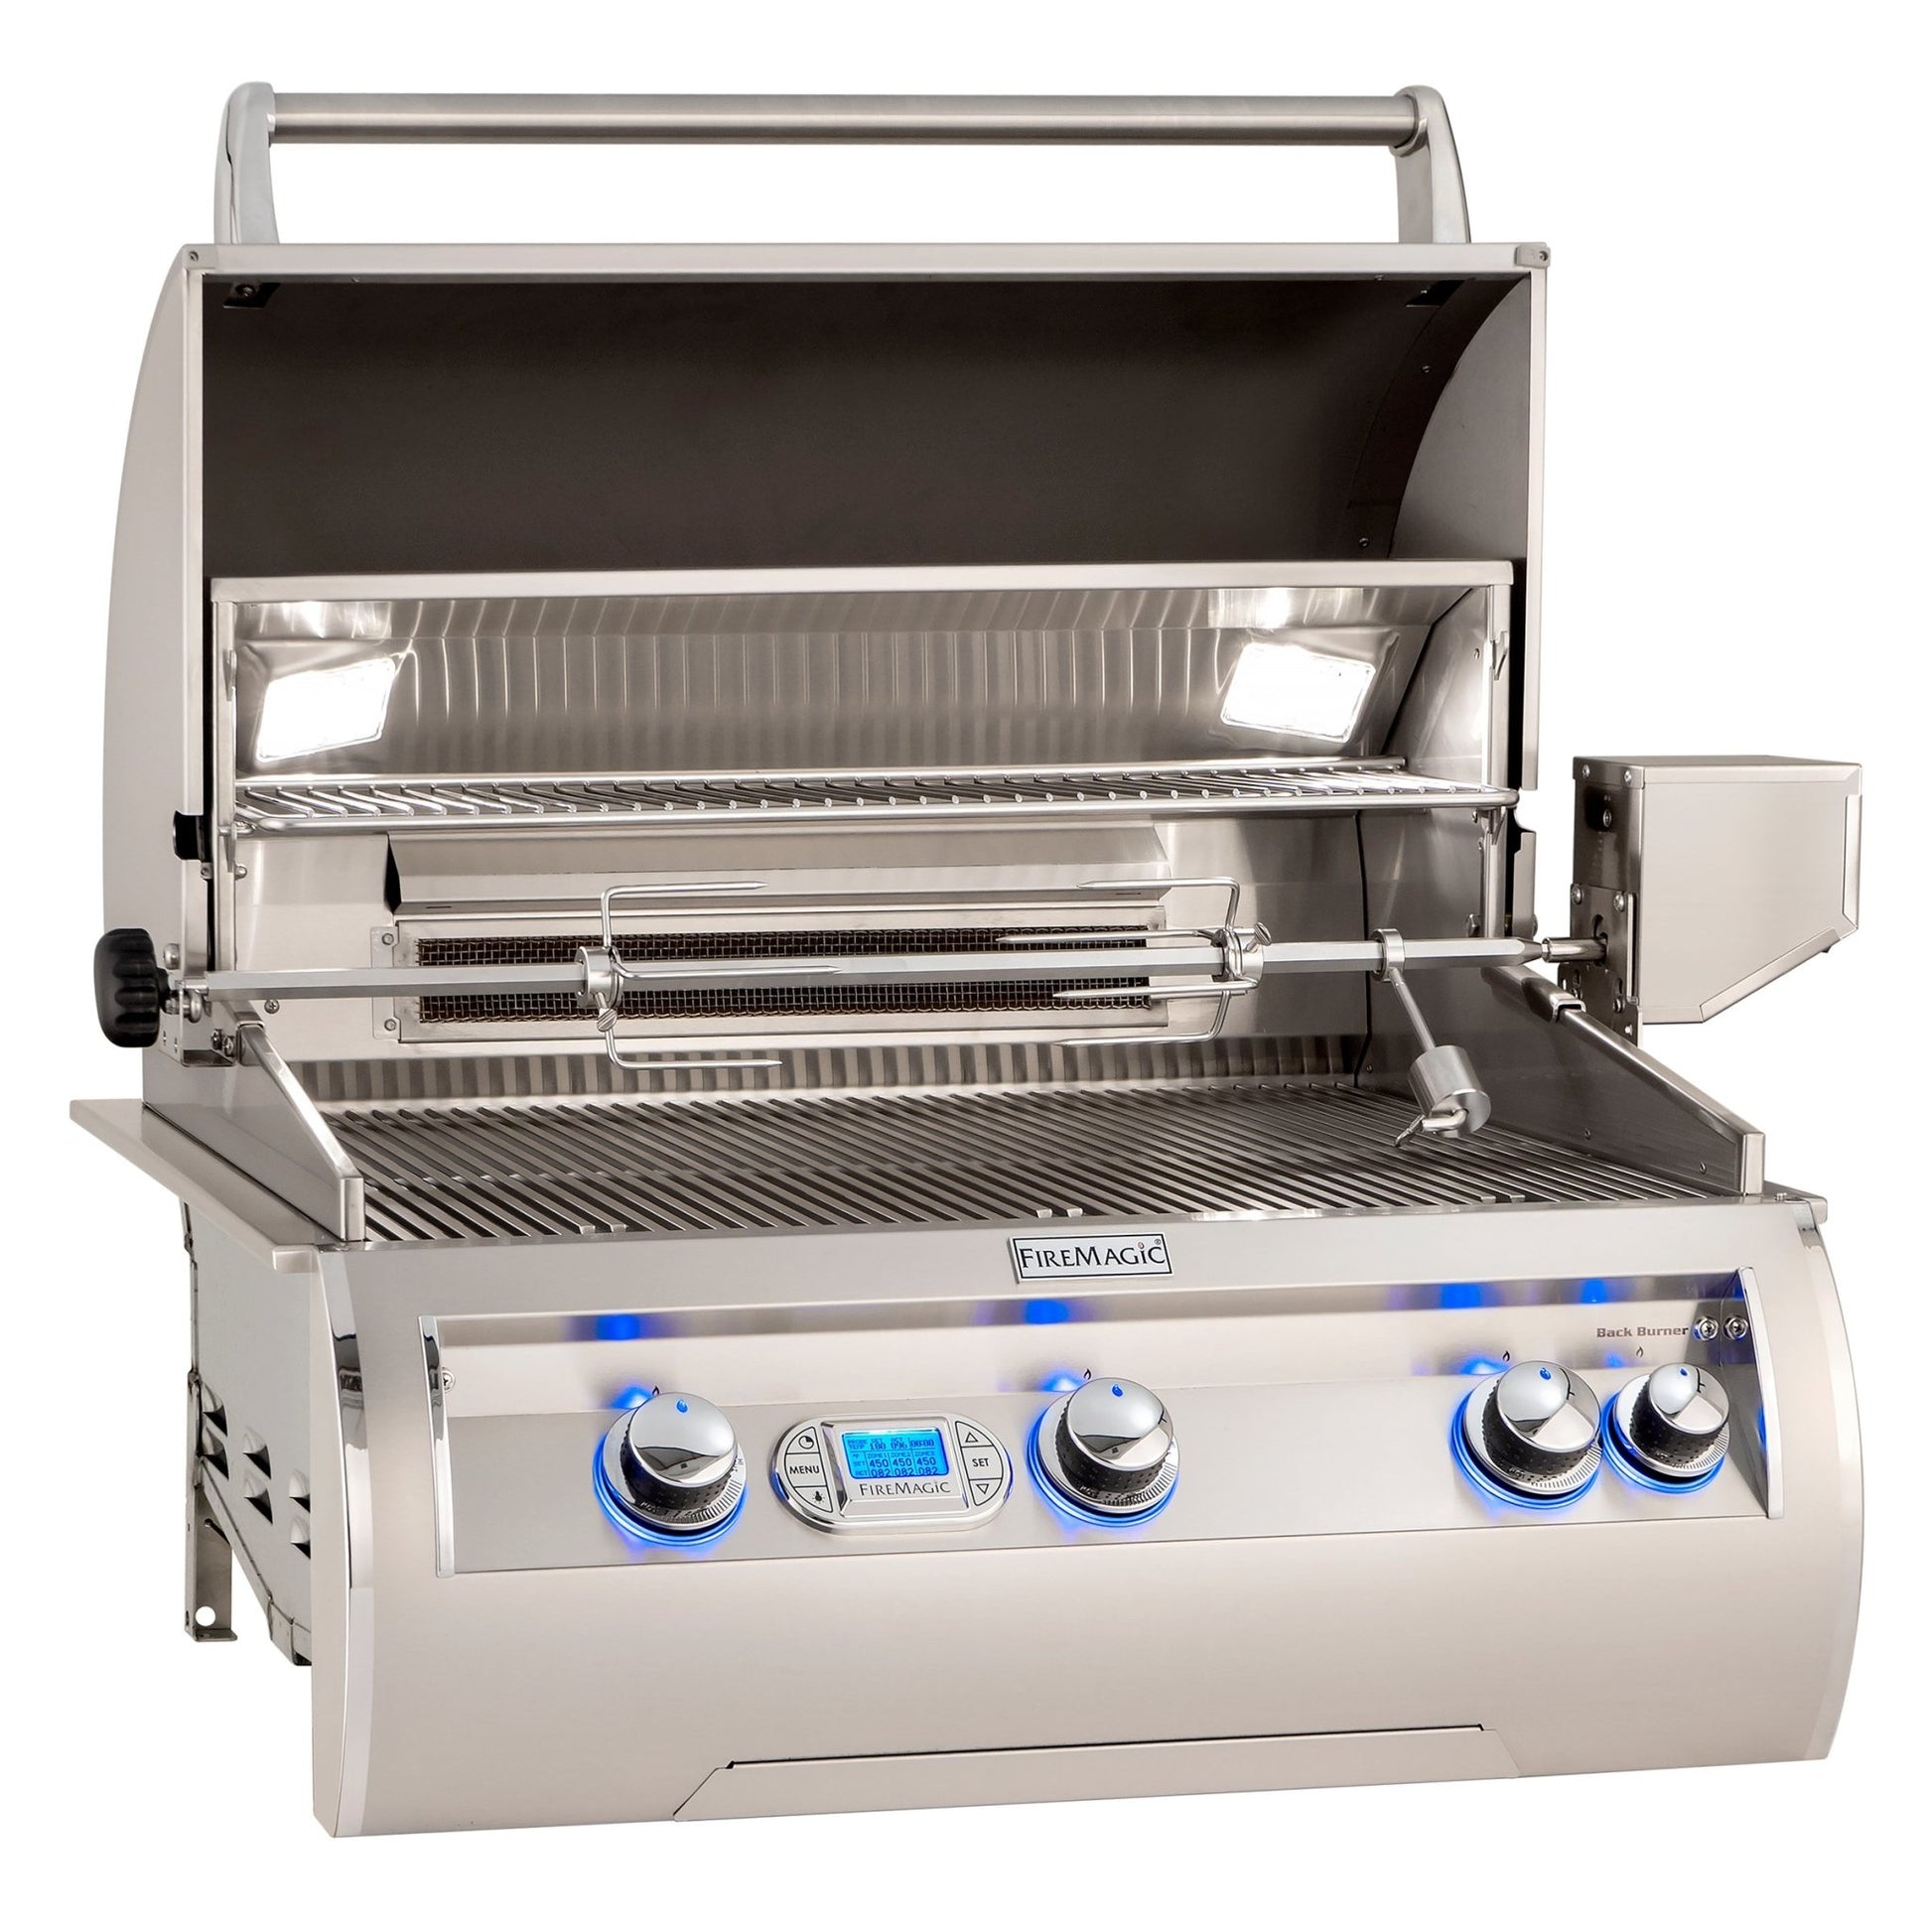 Fire Magic Echelon 30-Inch Built-In Grill Analog / Digital Thermometer - grillsNmore.com